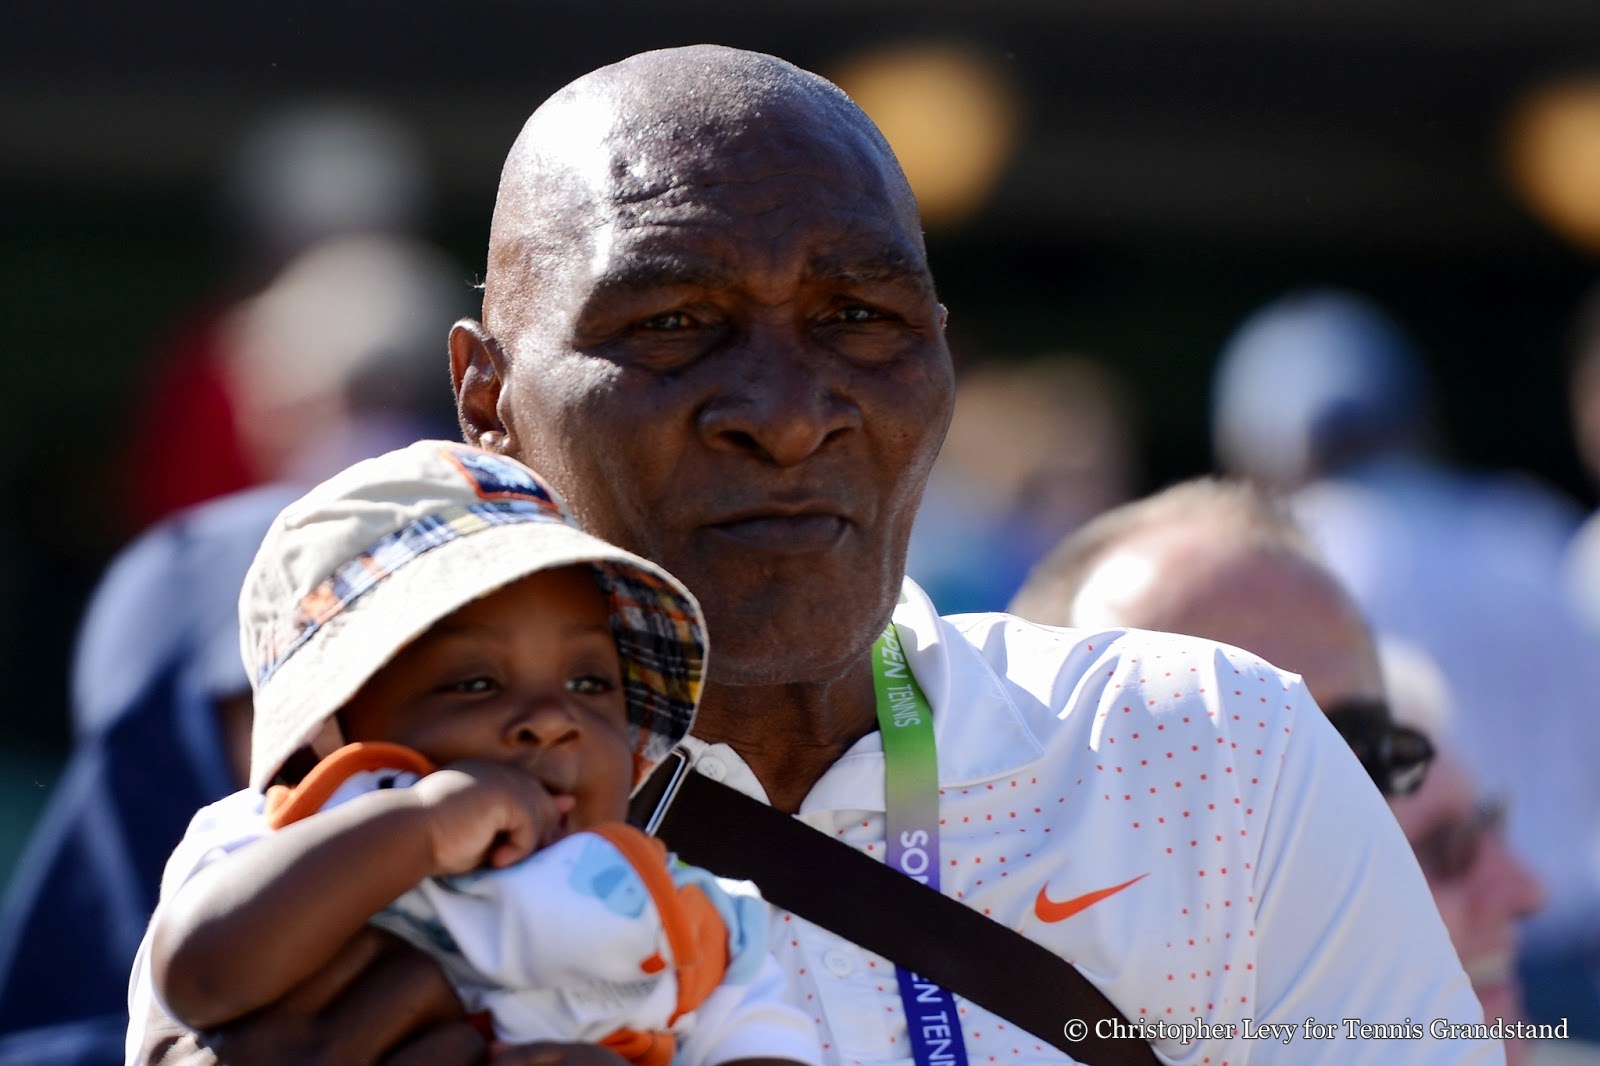 JUST REVEALED! Father of Serena and Venus Williams Had a Serious Stroke While ...